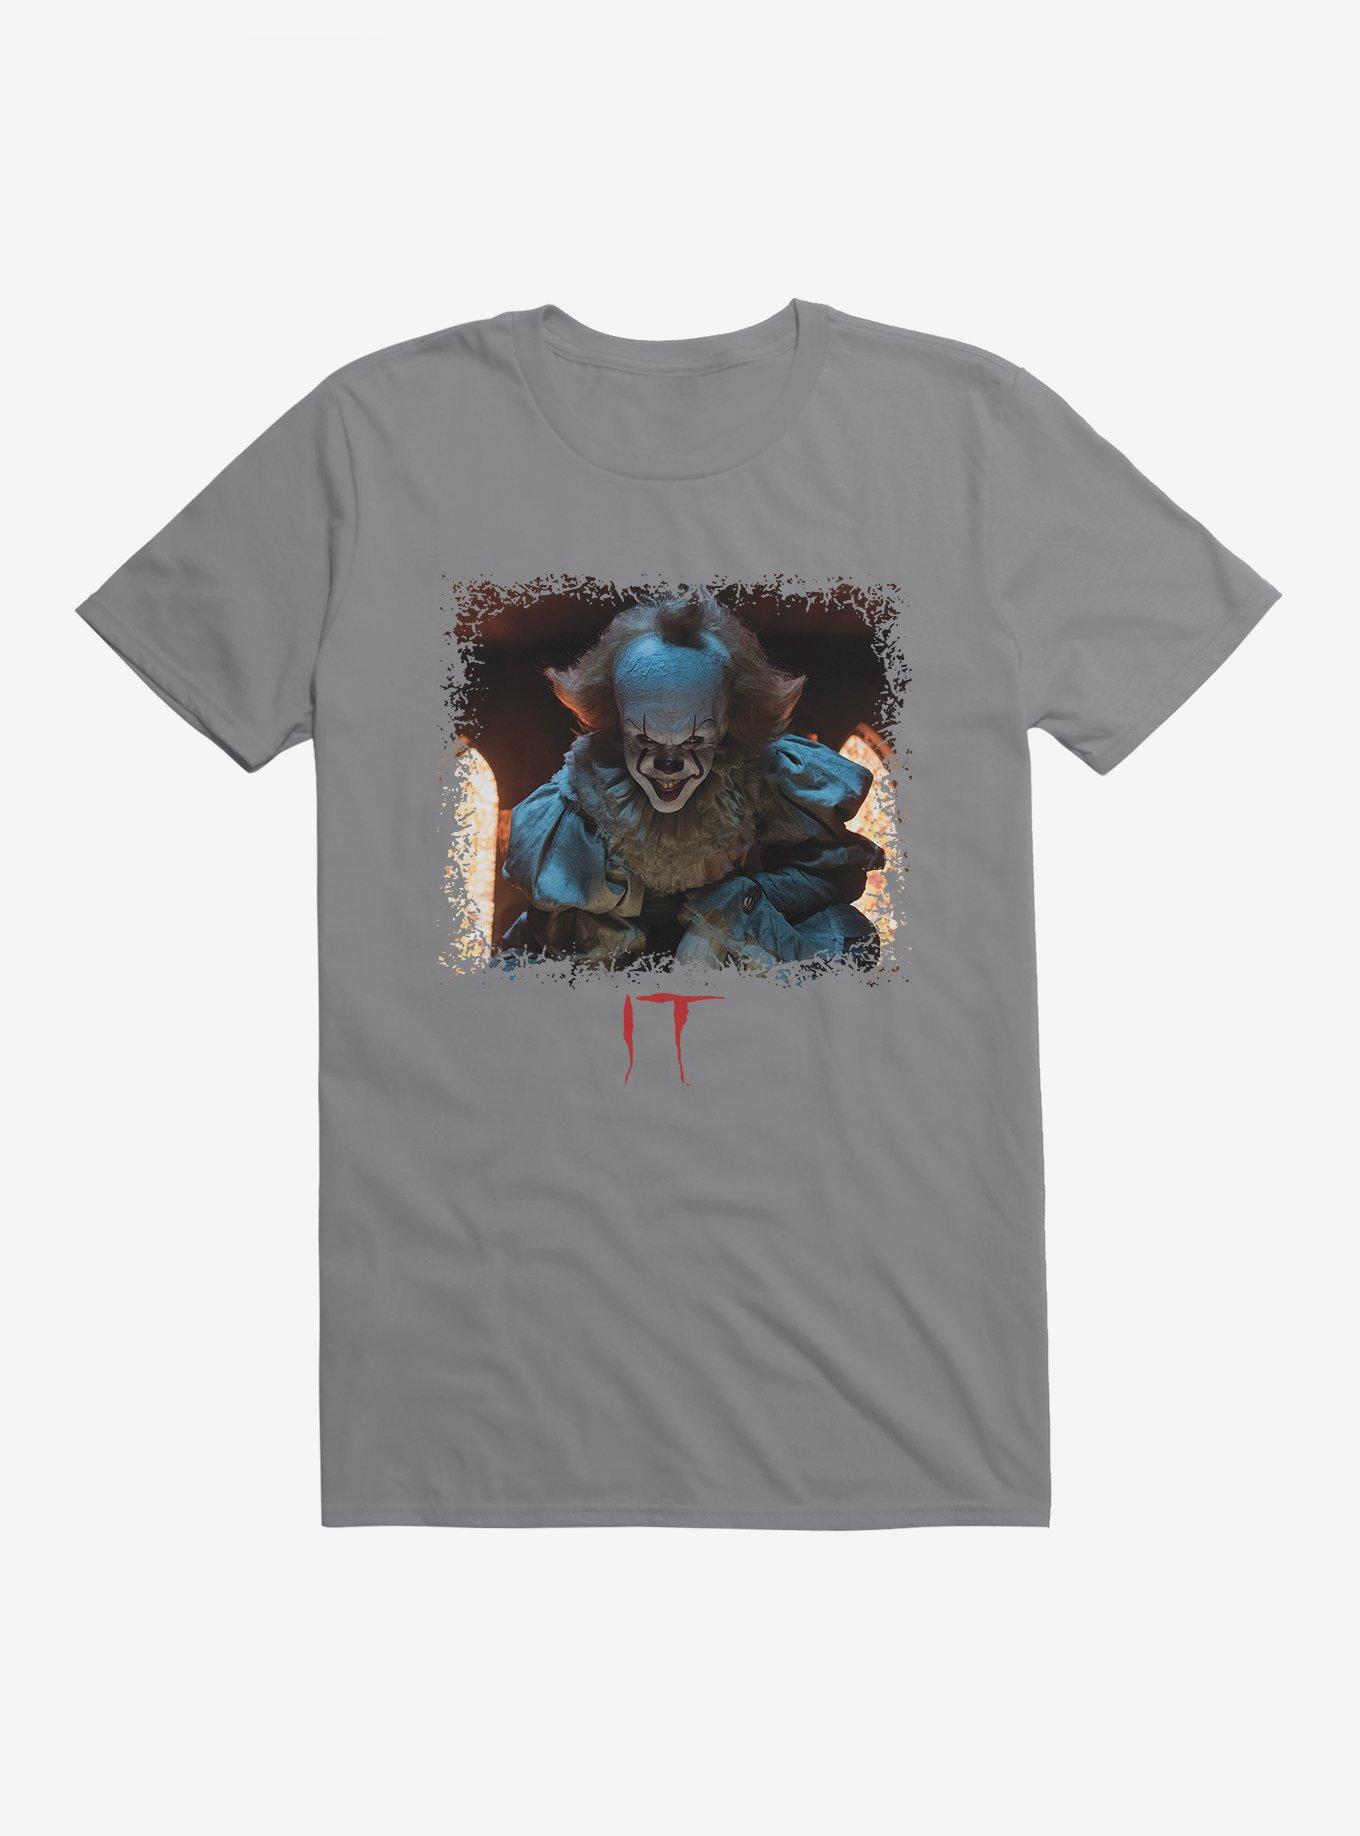 IT Pennywise Mischievous Smile T-Shirt, , hi-res